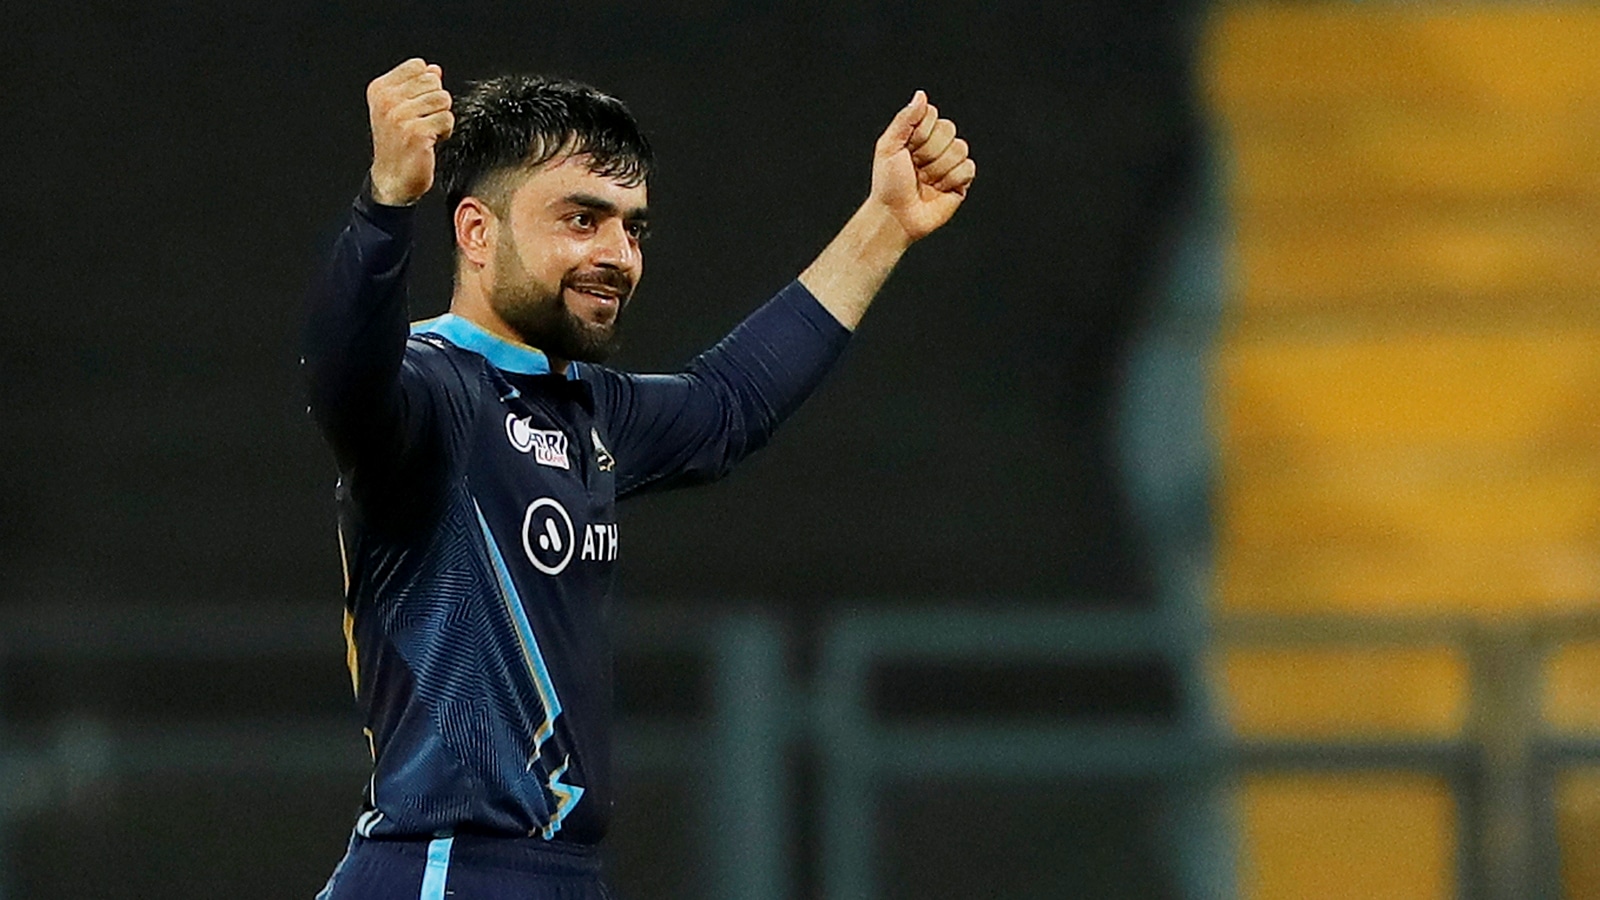 PBKS vs SRH, IPL 2021 Key Players: Rashid Khan, Chris Gayle and Other Key  Players To Watch Out For | 🏏 LatestLY